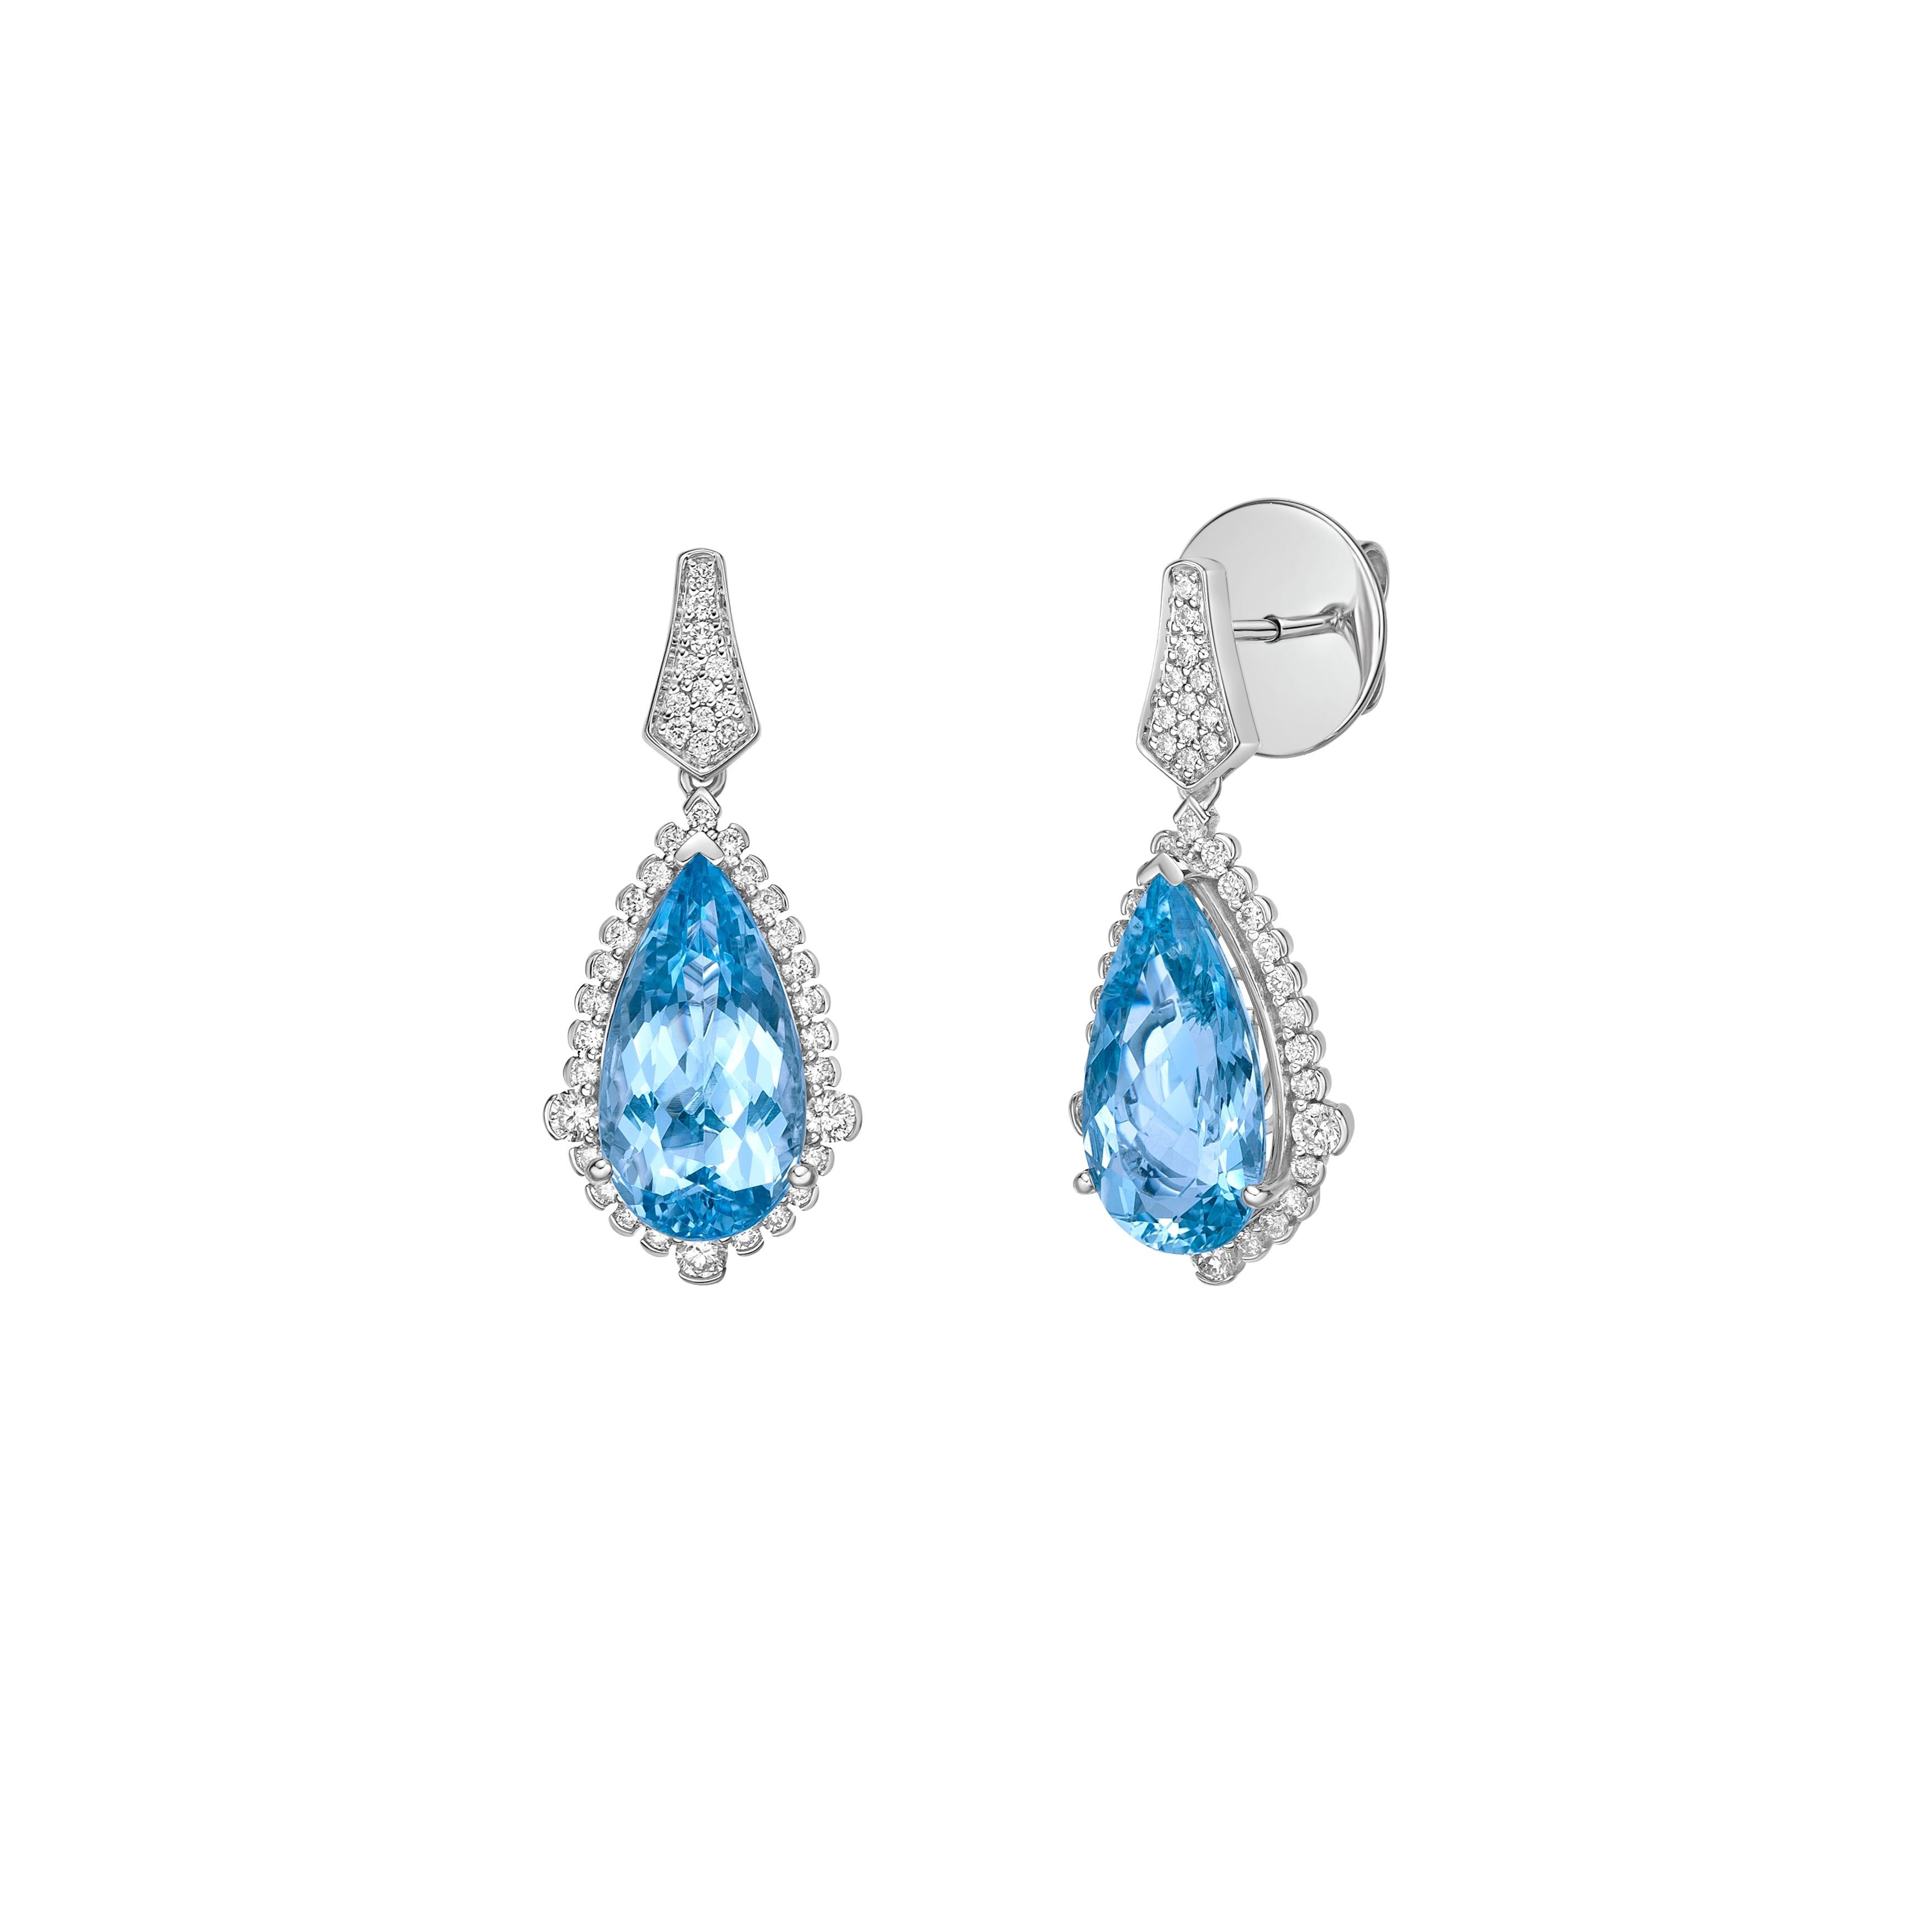 Pear Cut 7.29 Carat Aquamarine Drop Earrings in 18Karat White Gold with White Diamond. For Sale